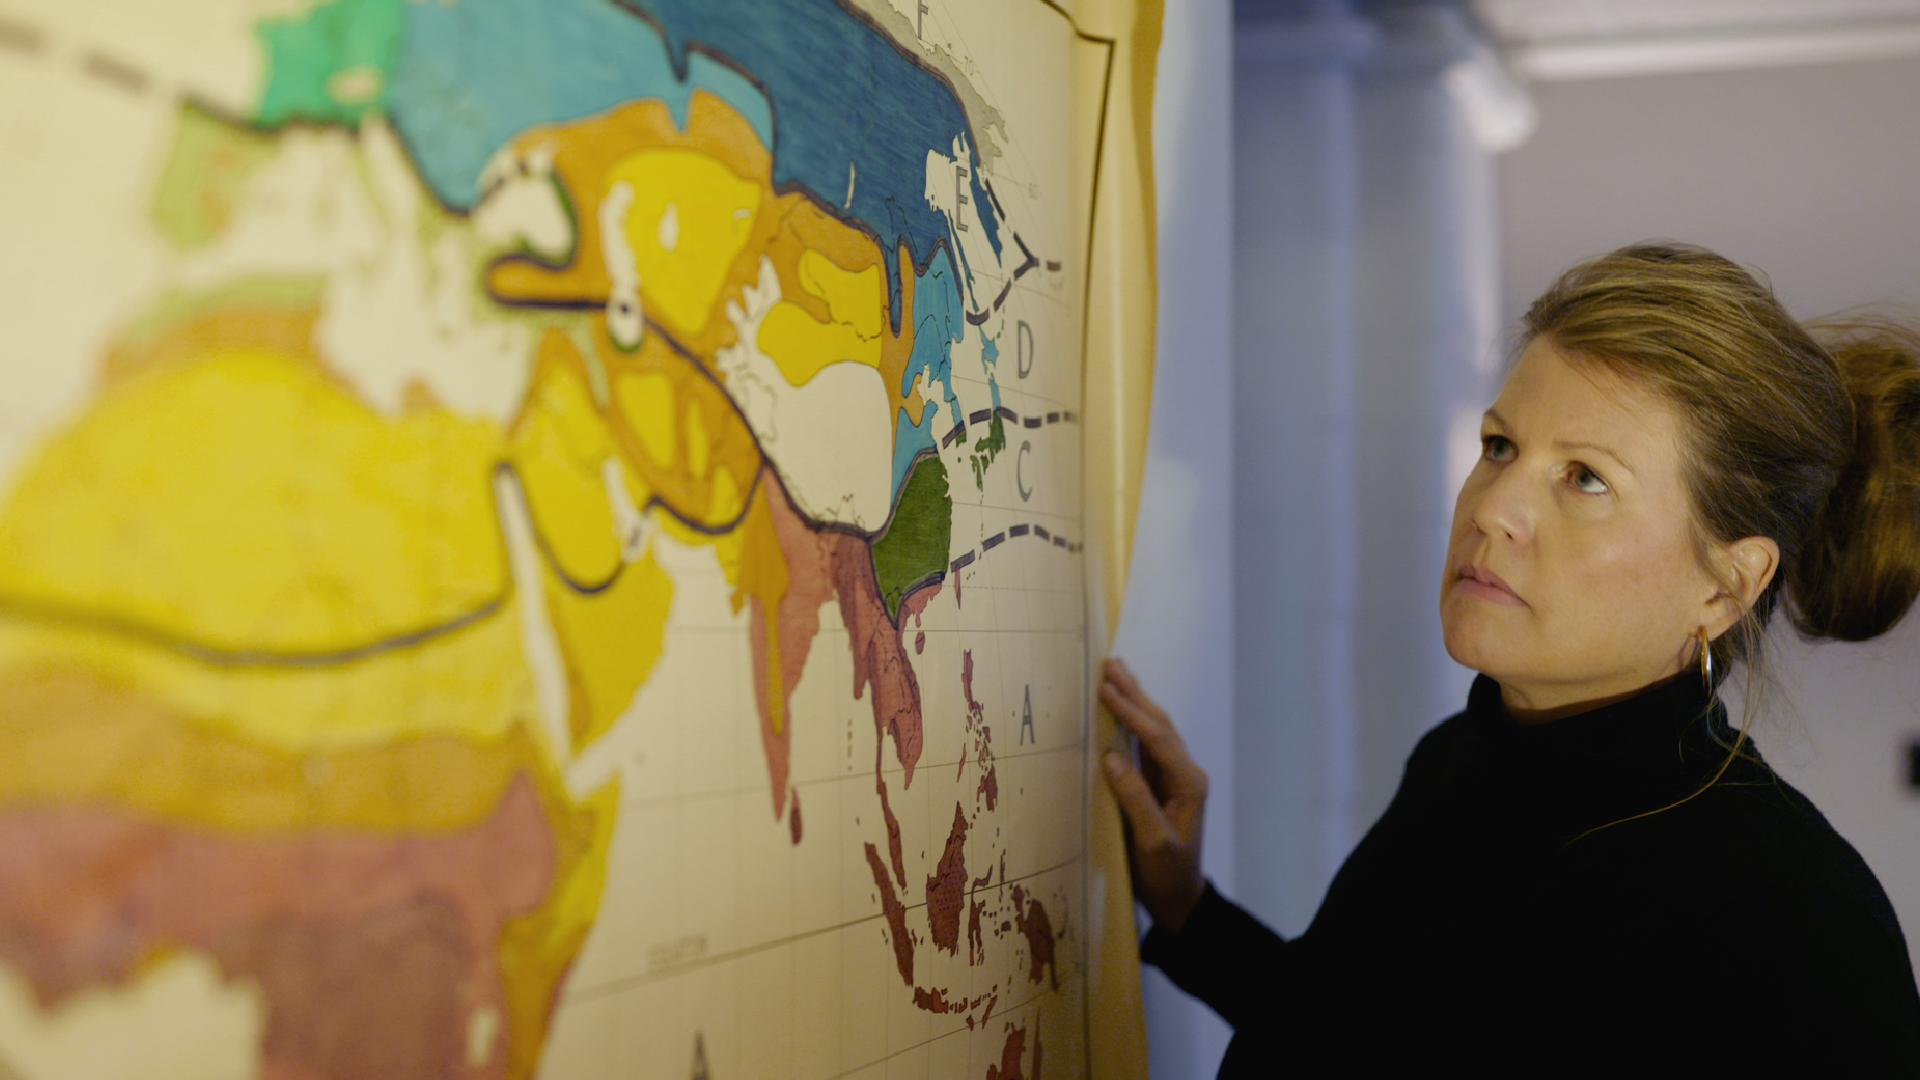 A woman looks at a map on the wall